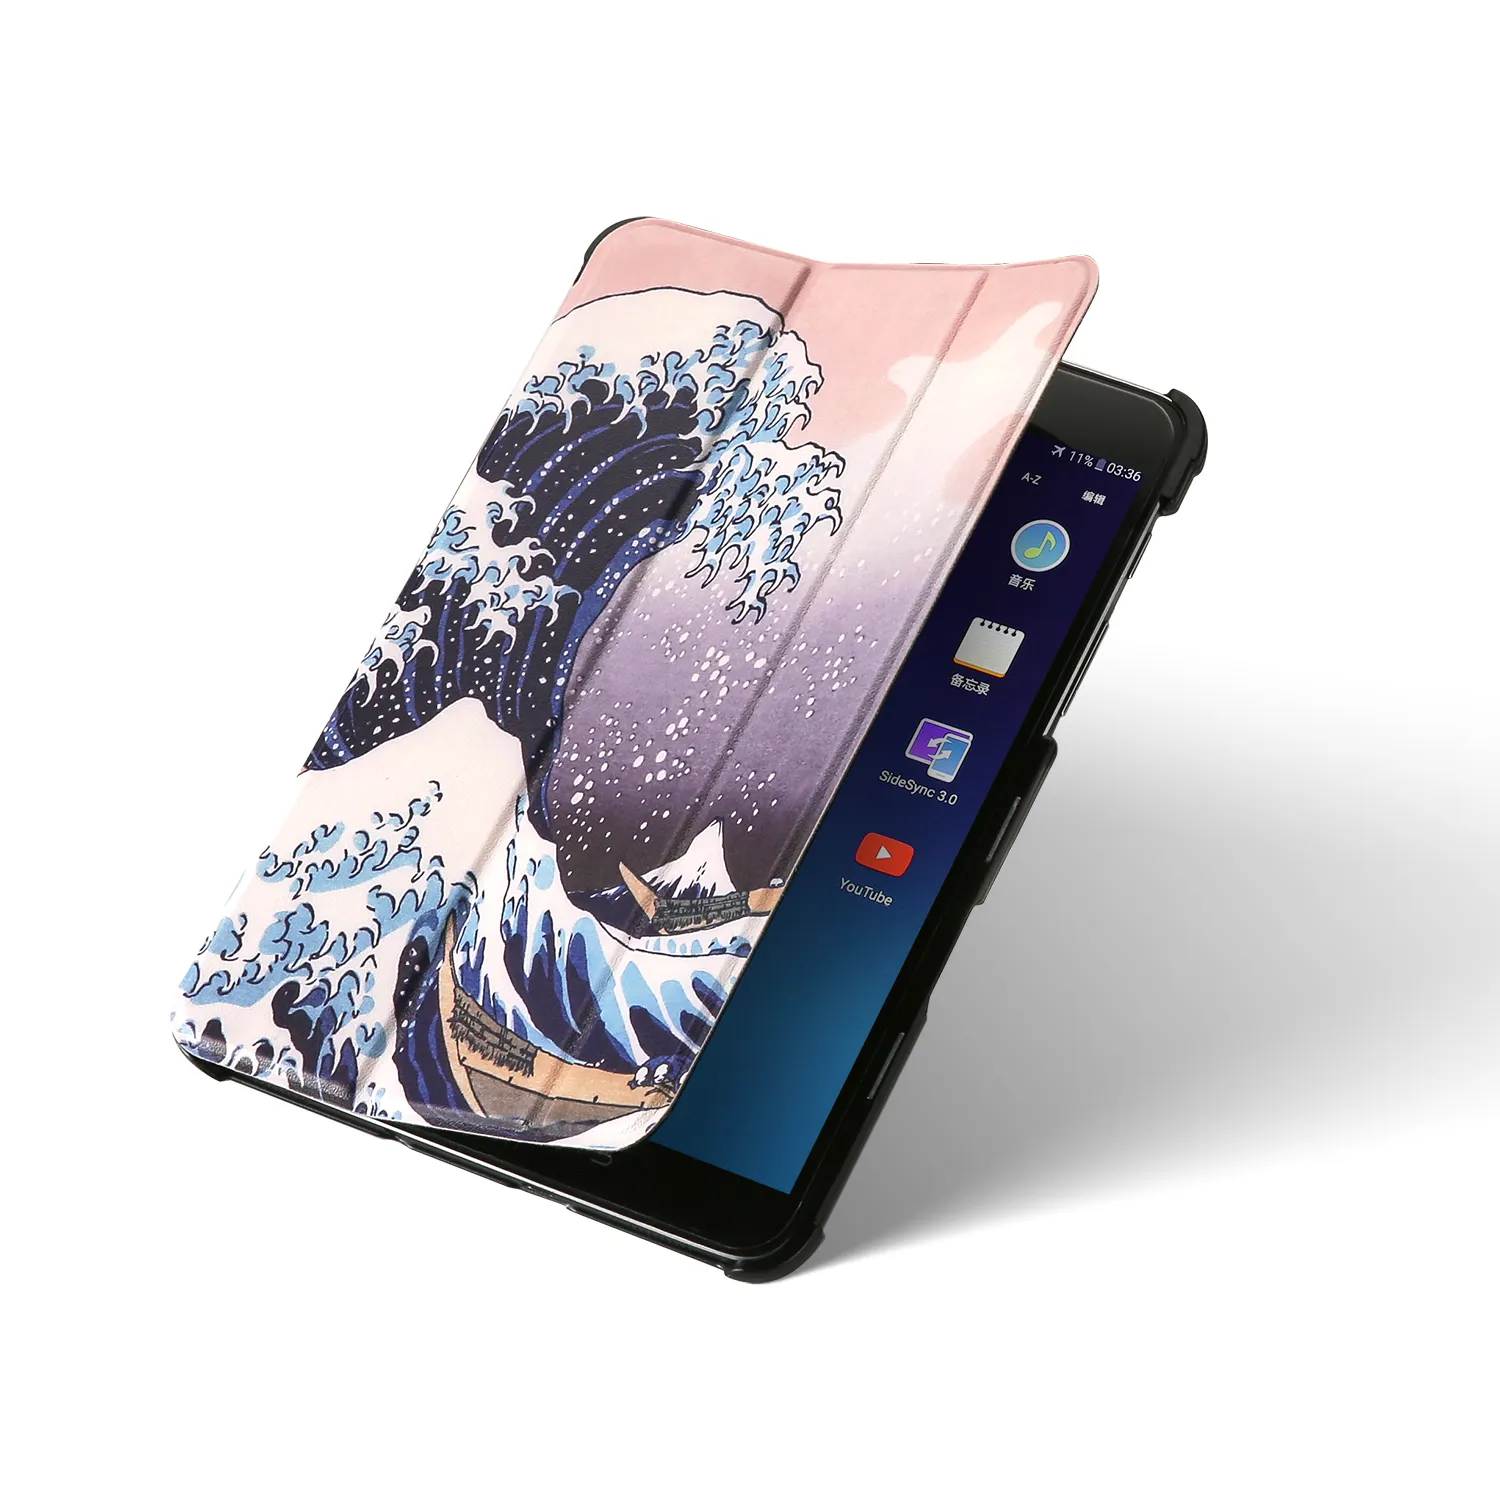 Exclusive design Triple folded Protective case Cover for Samsung Galaxy Tab S2 8.0'' T710/T713/T715C/T719C